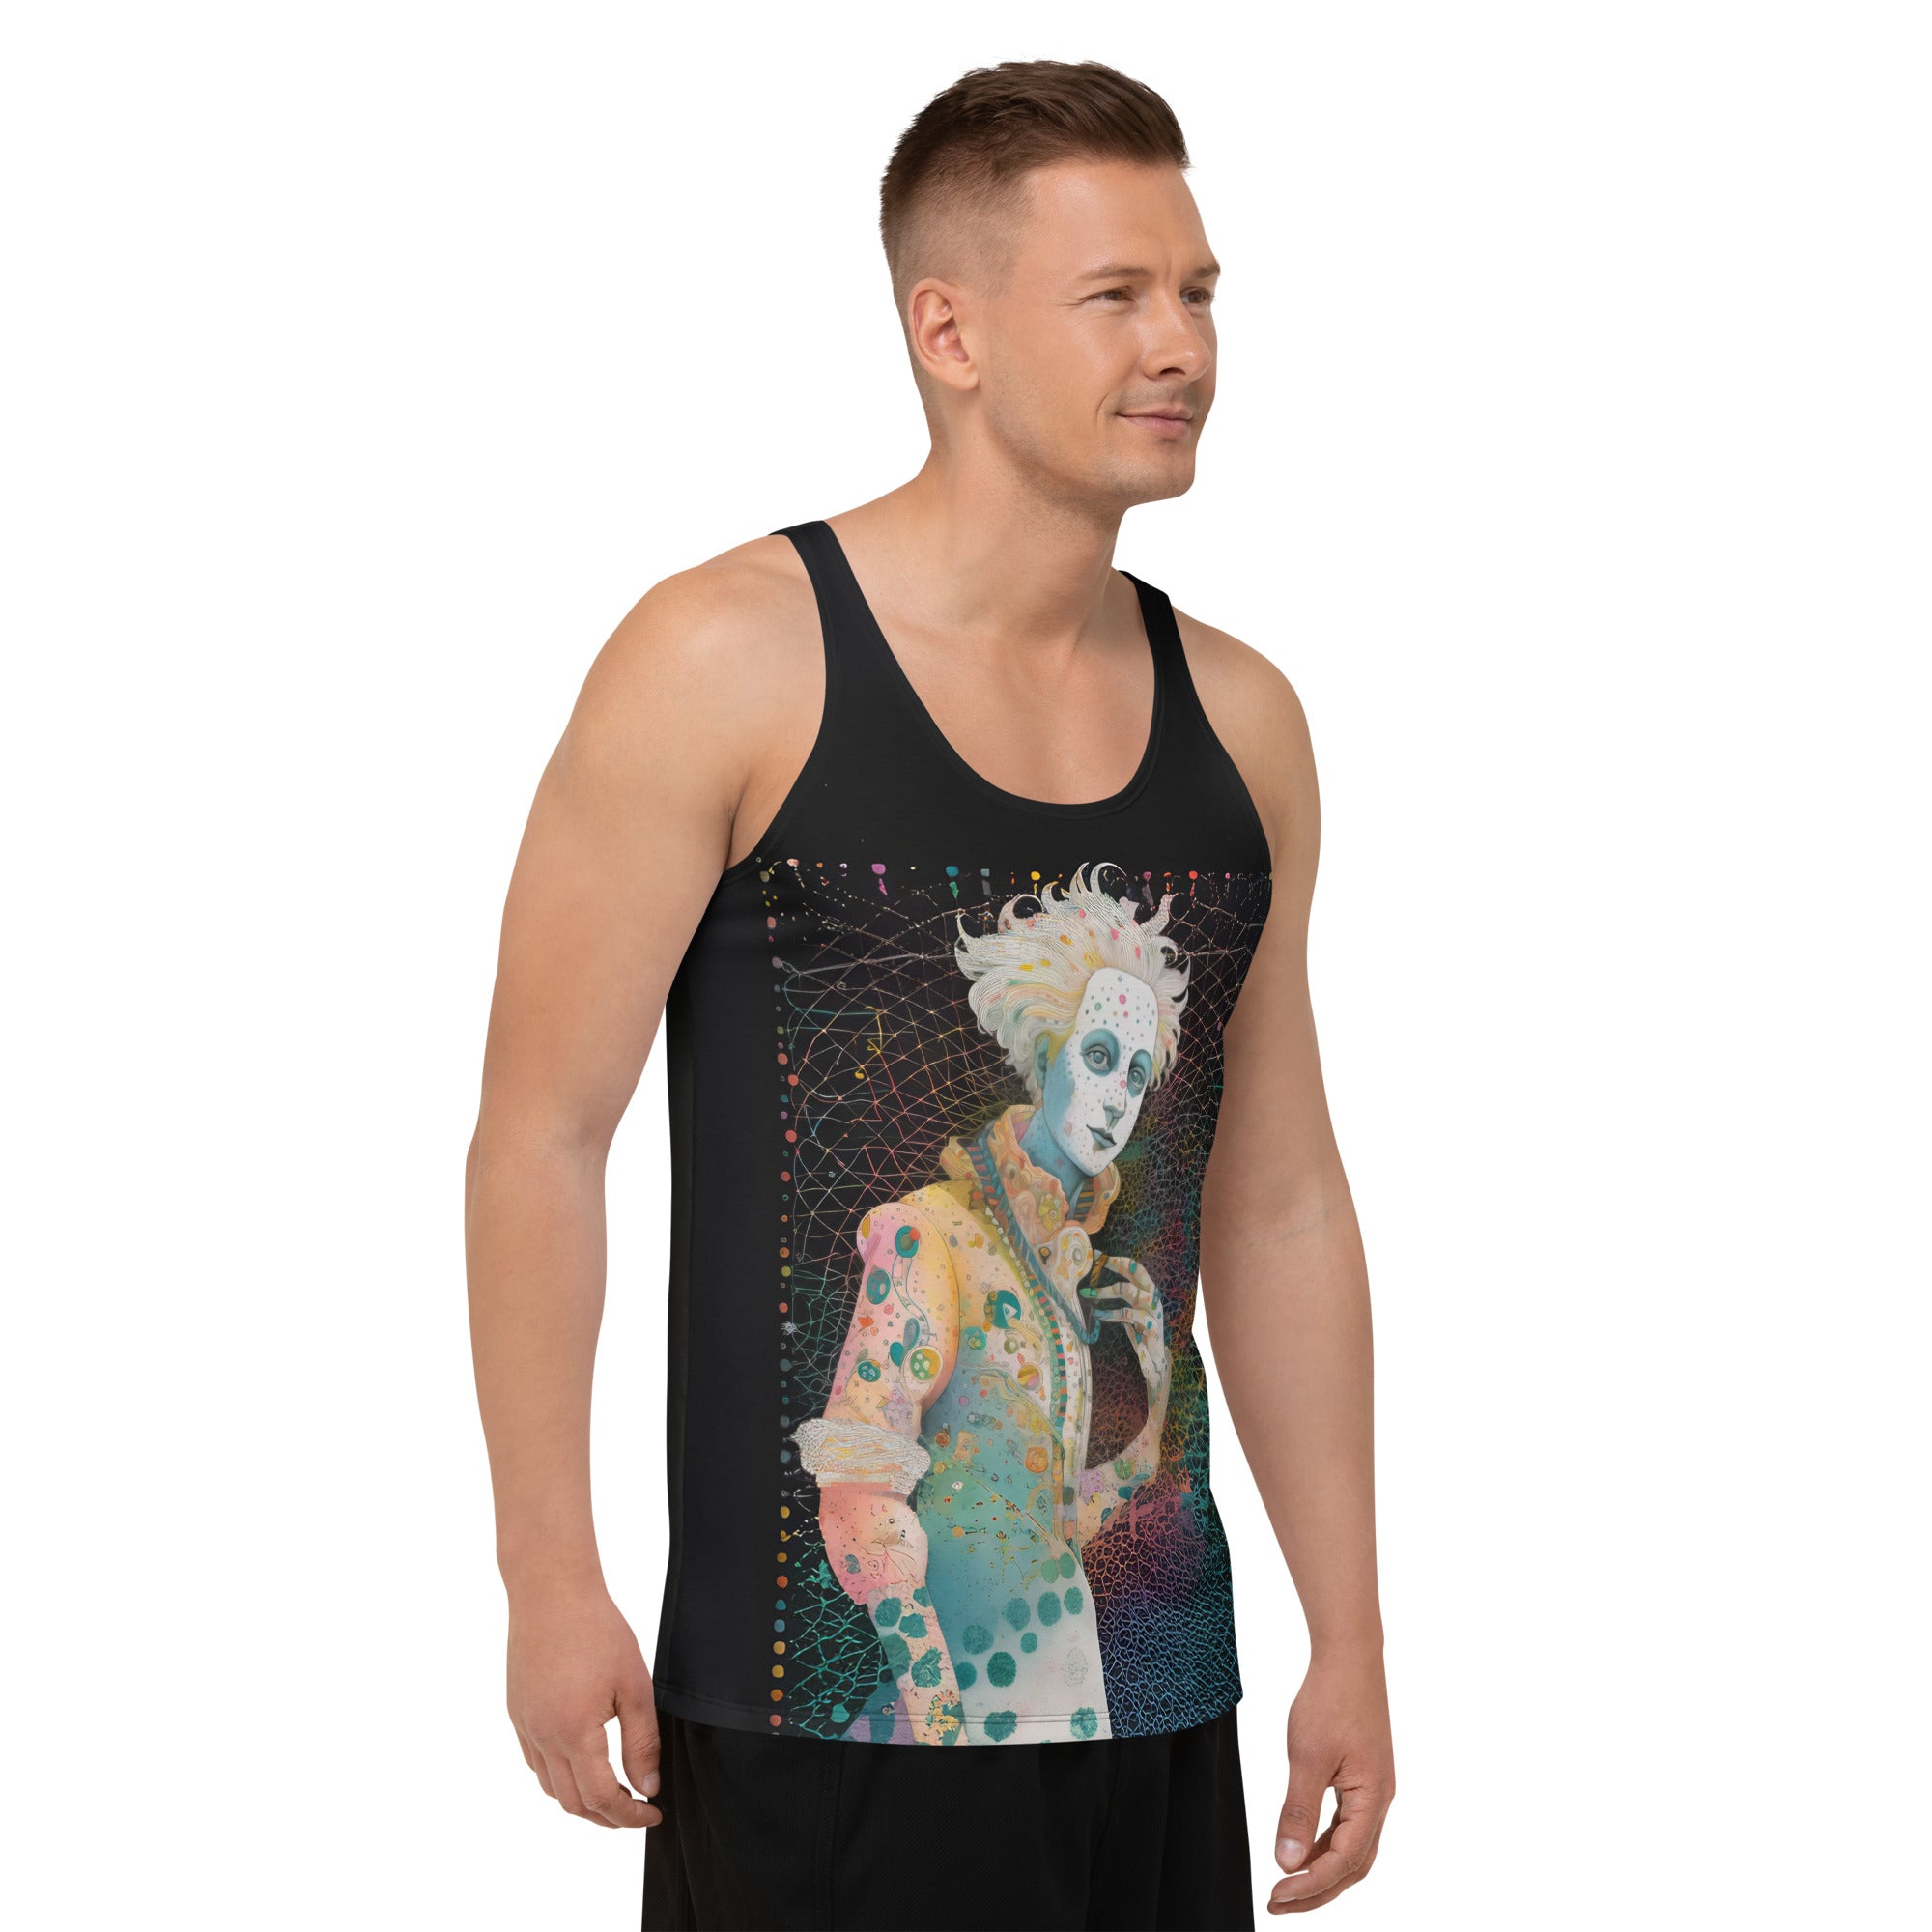 Folded Flowing Melody Men's Tank Top ready for display.